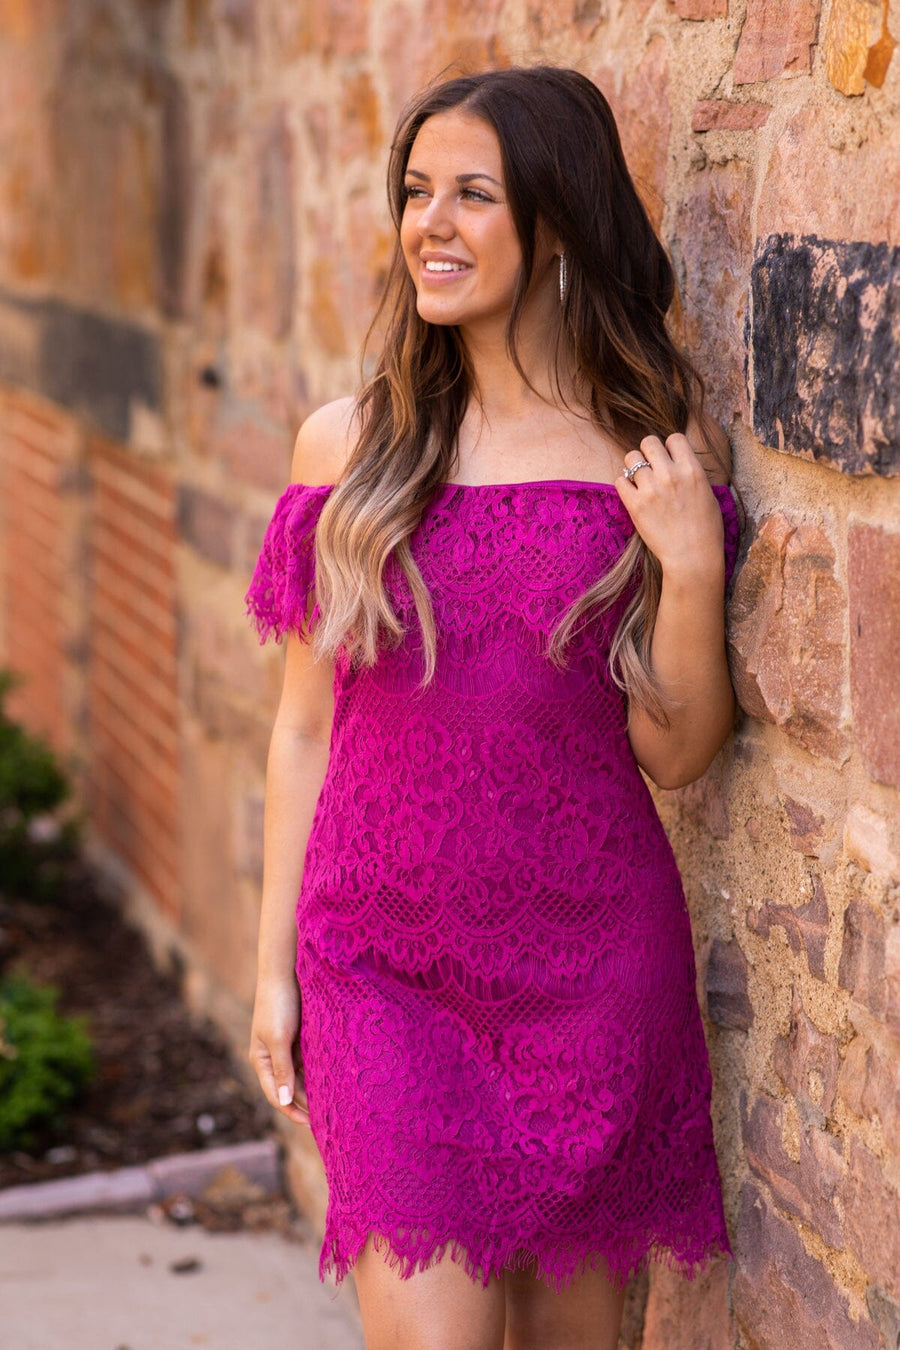 Berry Scalloped Trim Lace Dress - Filly Flair